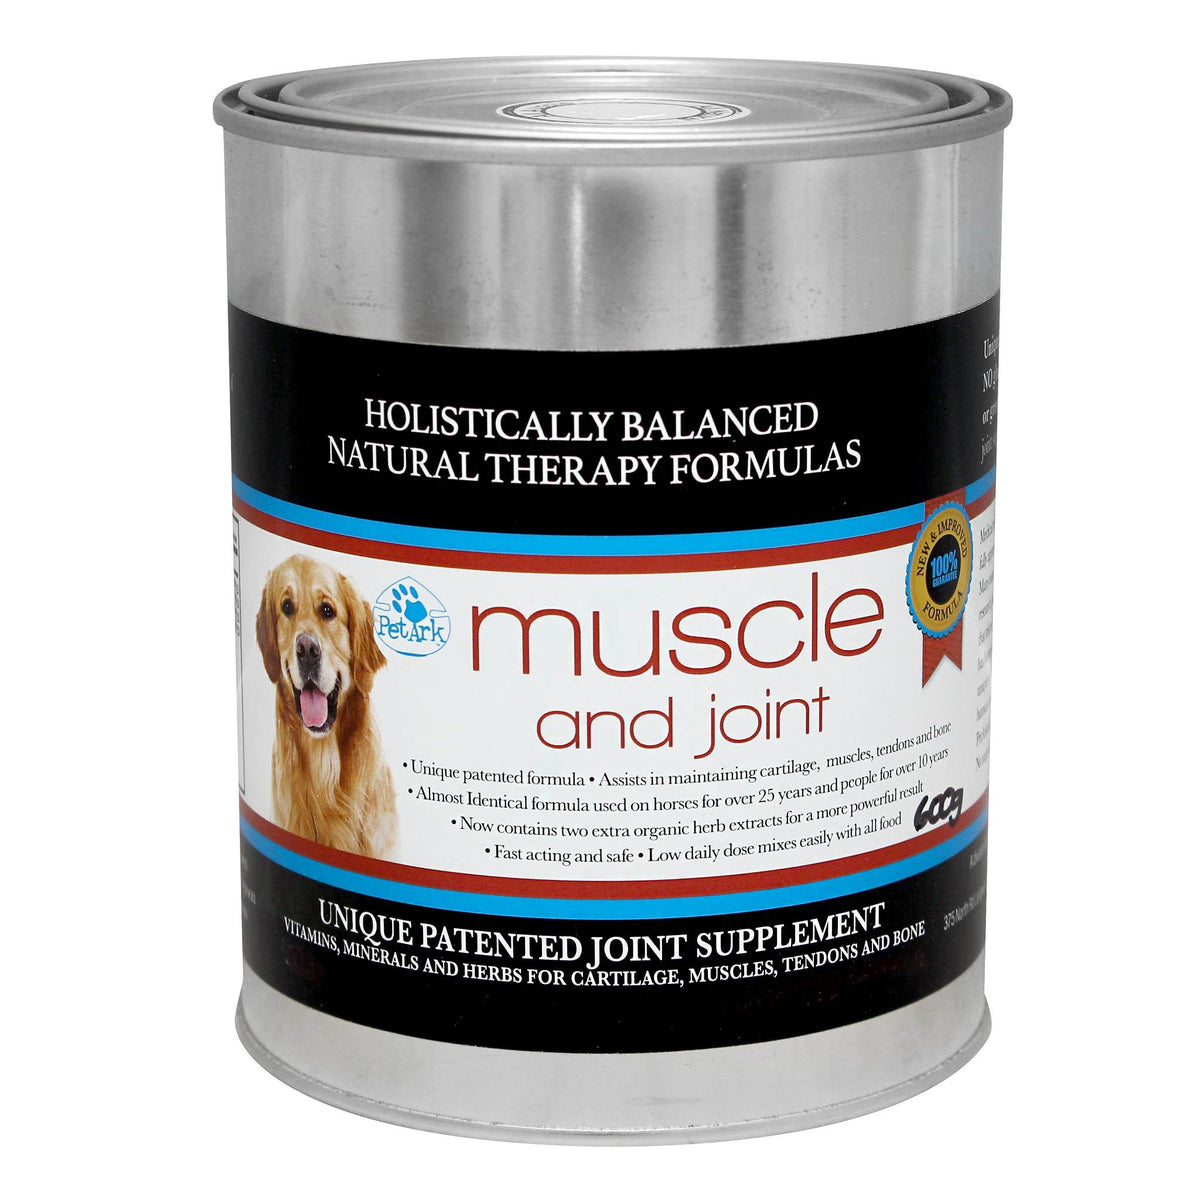 PetArk Muscle &amp; Joint Supplement for Dogs